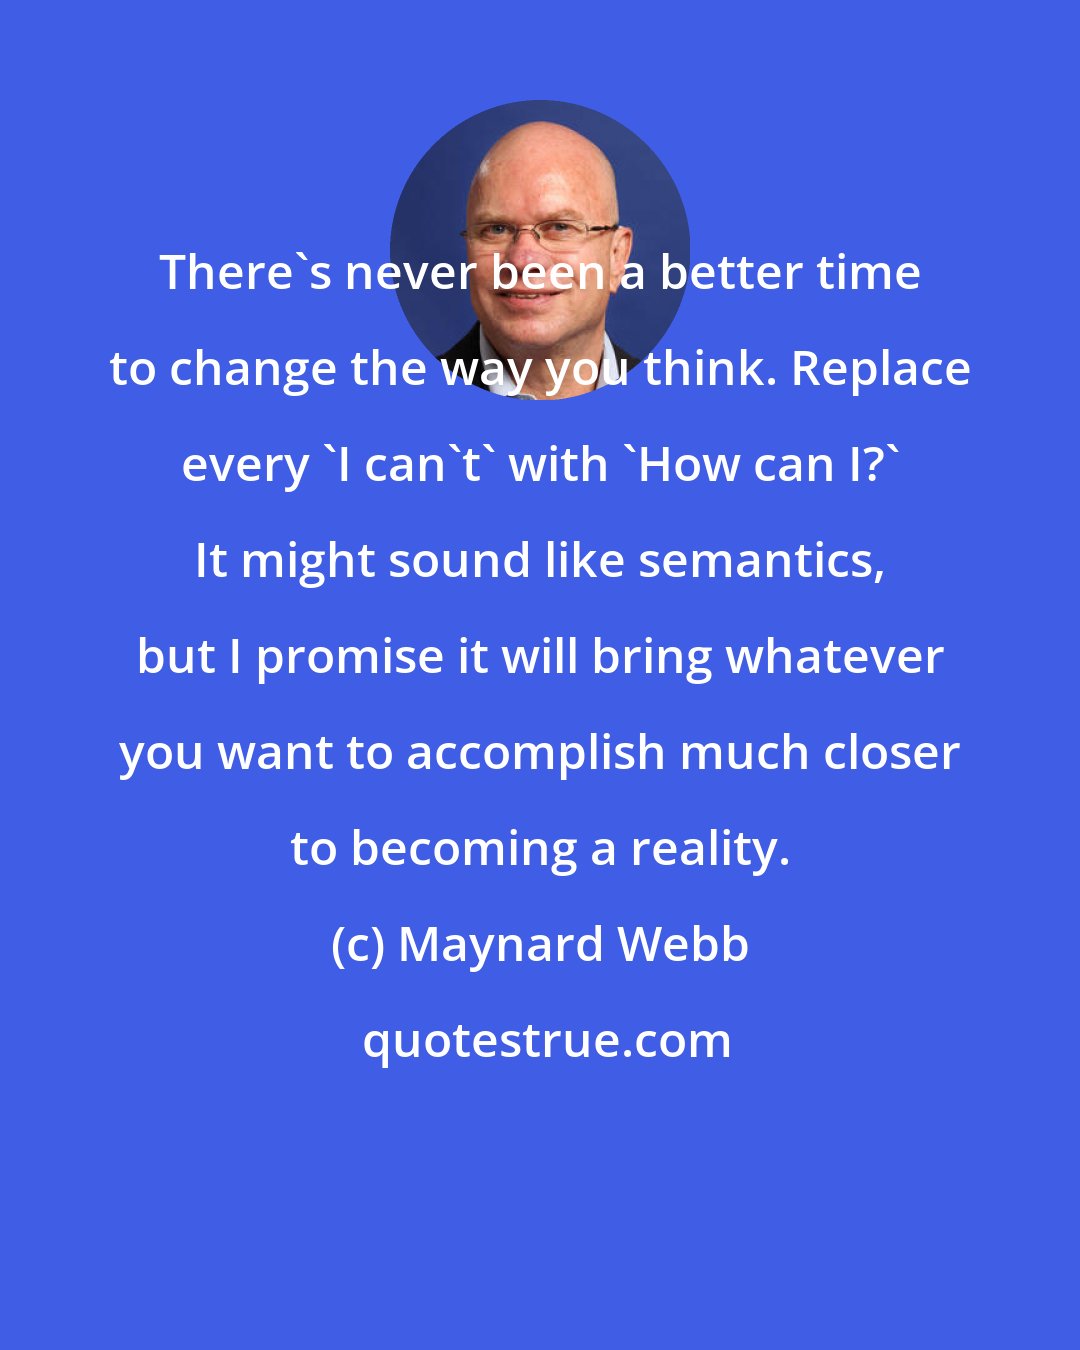 Maynard Webb: There's never been a better time to change the way you think. Replace every 'I can't' with 'How can I?' It might sound like semantics, but I promise it will bring whatever you want to accomplish much closer to becoming a reality.